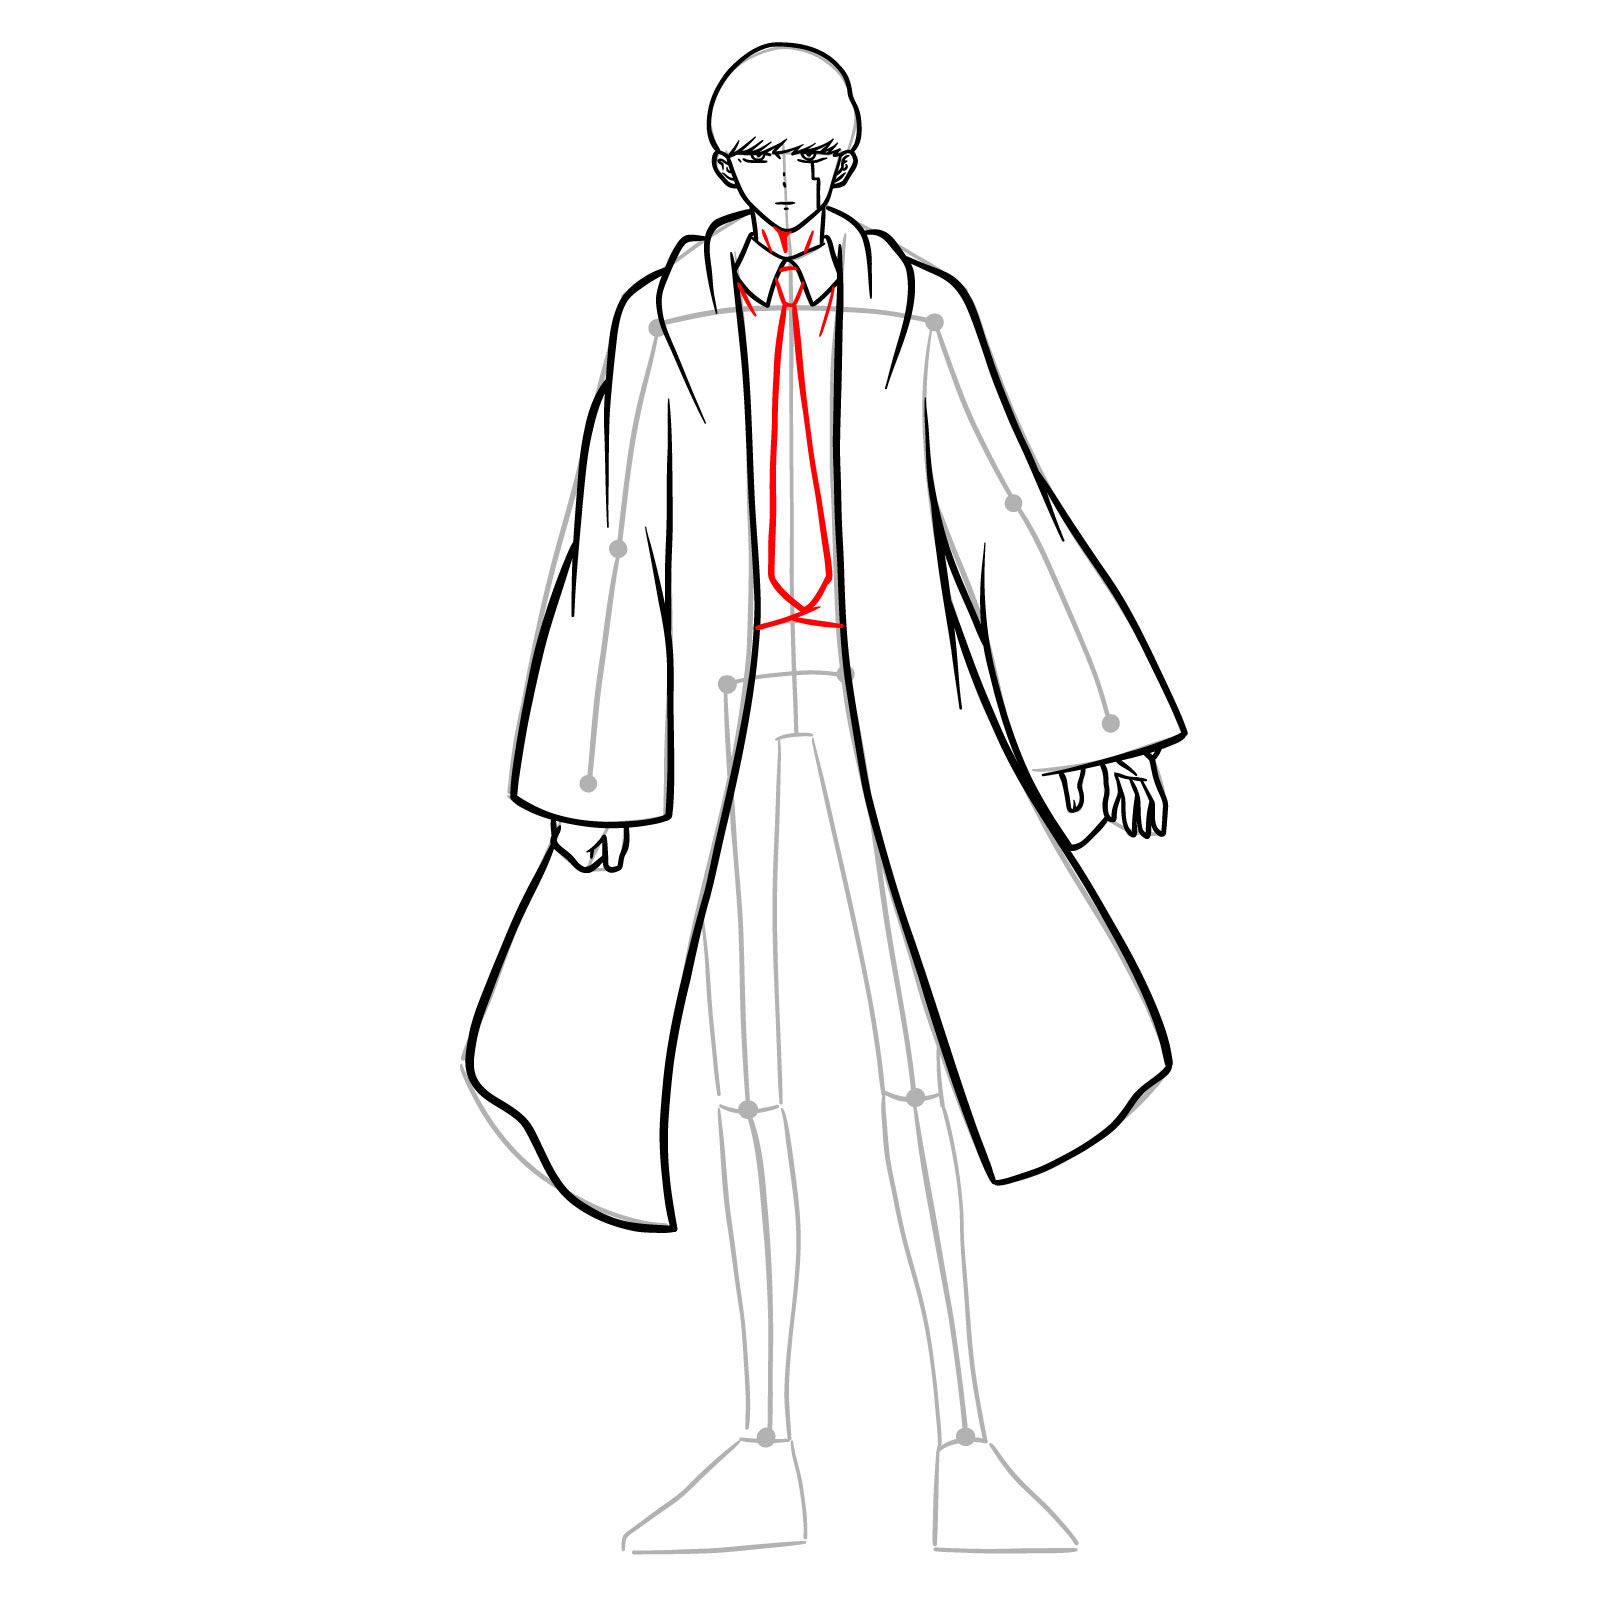 Mash full body drawing with detailed neck, shirt, and tie - step 13